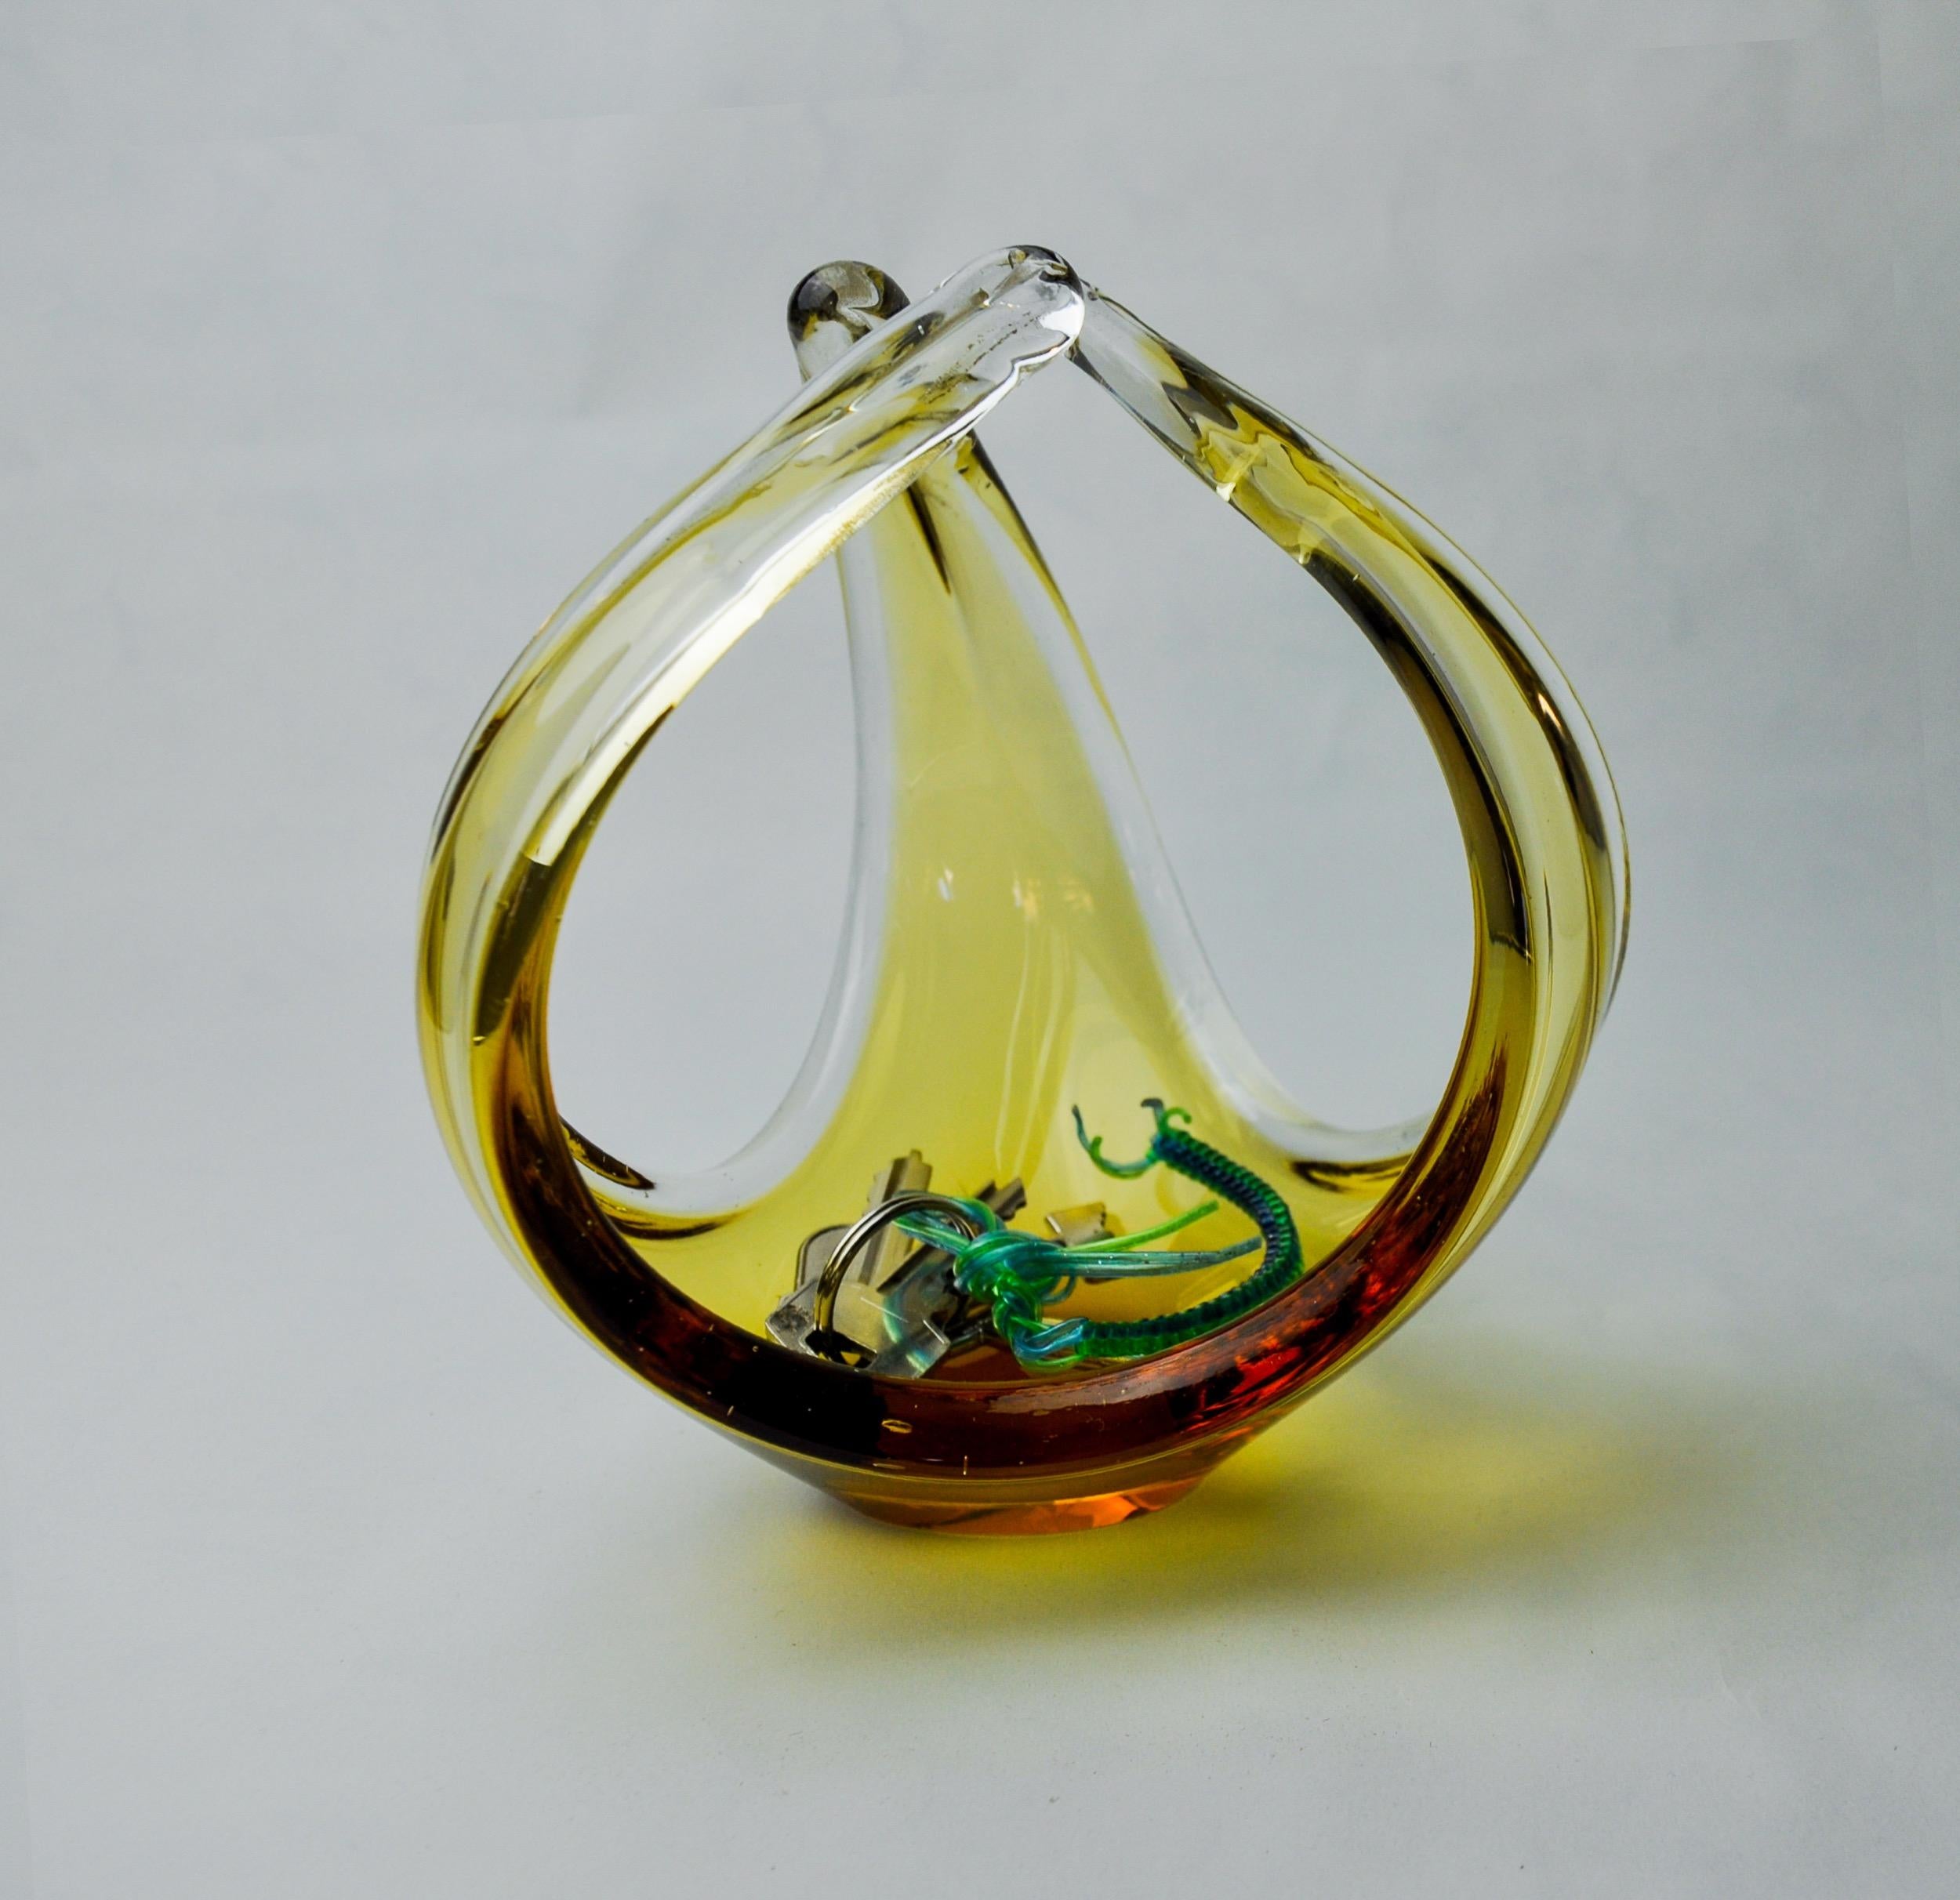 Stunning and rare yellow centerpiece designated and made for murano seguso in the 1970s. Artisanal work of glass according to the 